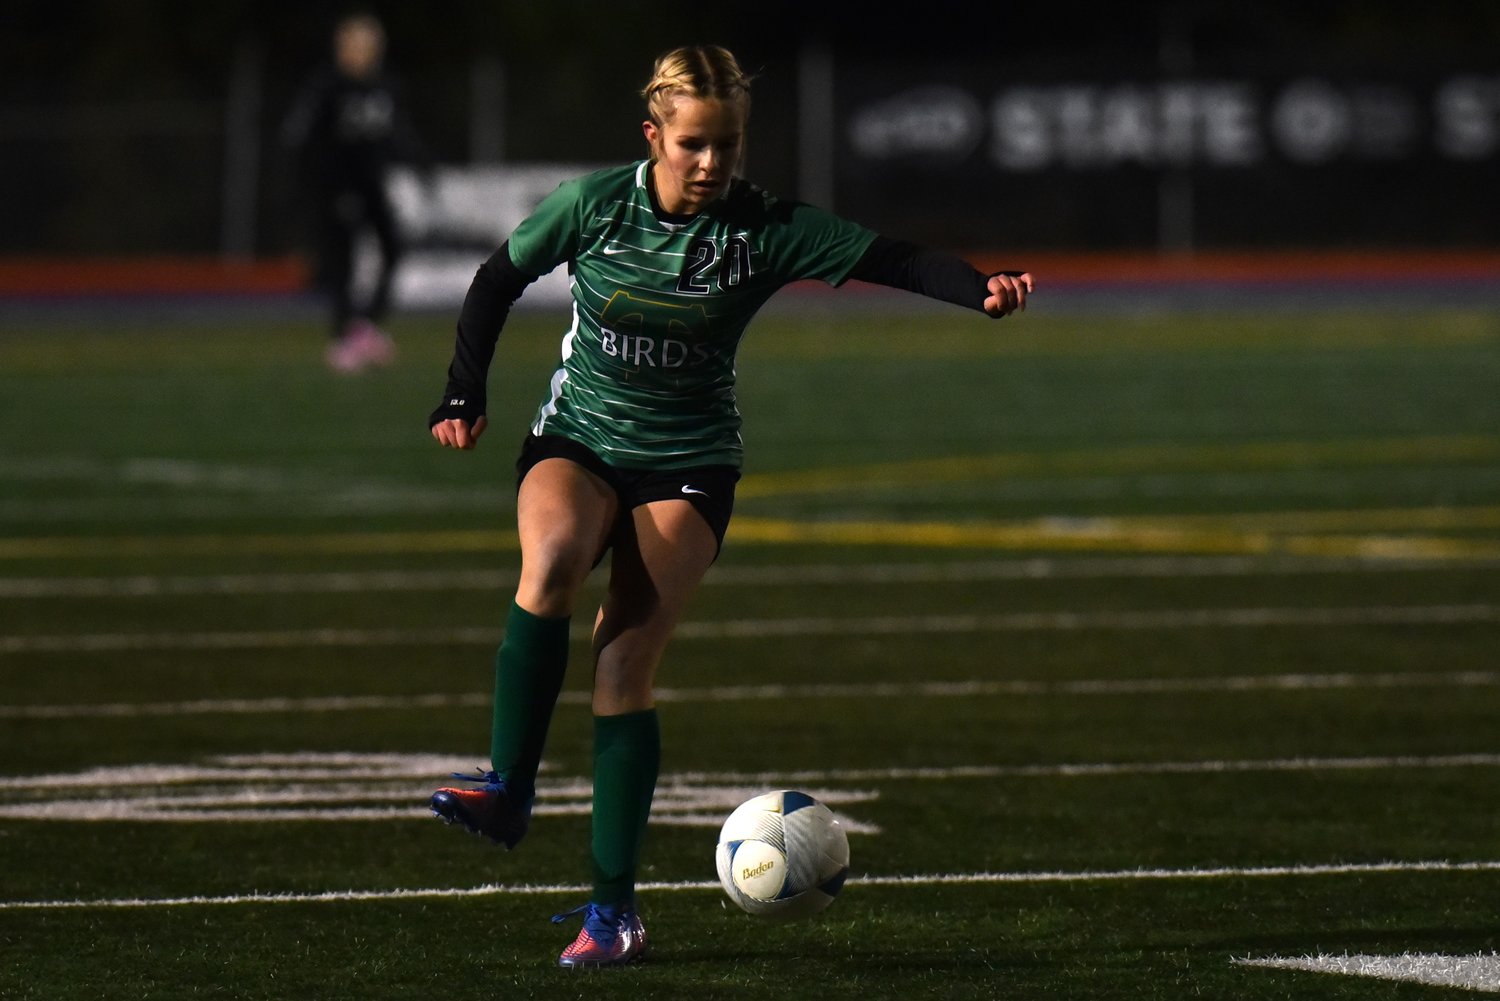 Kayla Pope controls the ball during Tumwater's 3-1 loss to Columbia River in the 2A state semifinals, on Nov. 18 at Shoreline Stadium.